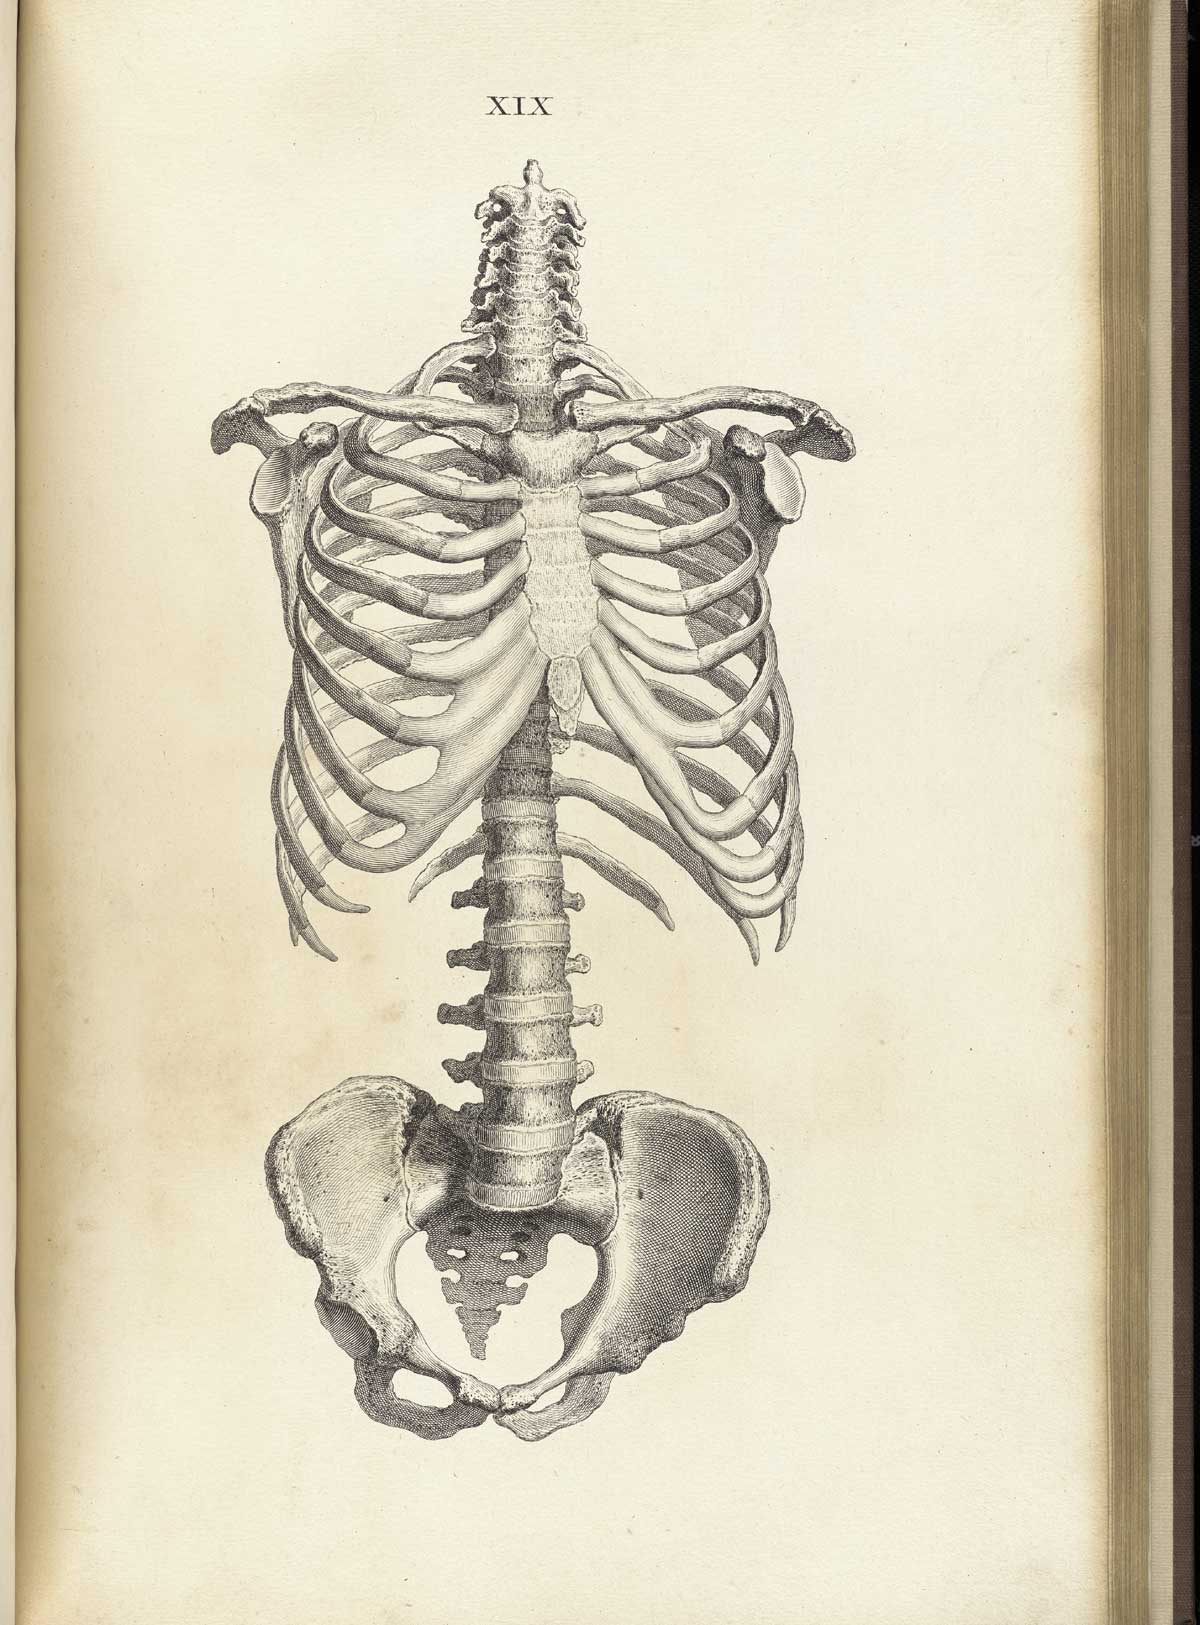 Engraving of the anterior view of the trunk of a skeleton, including rib cage, vertebral column and pelvis, from William Cheselden’s Osteographia, NLM Call no.: WZ 260 C499o 1733.